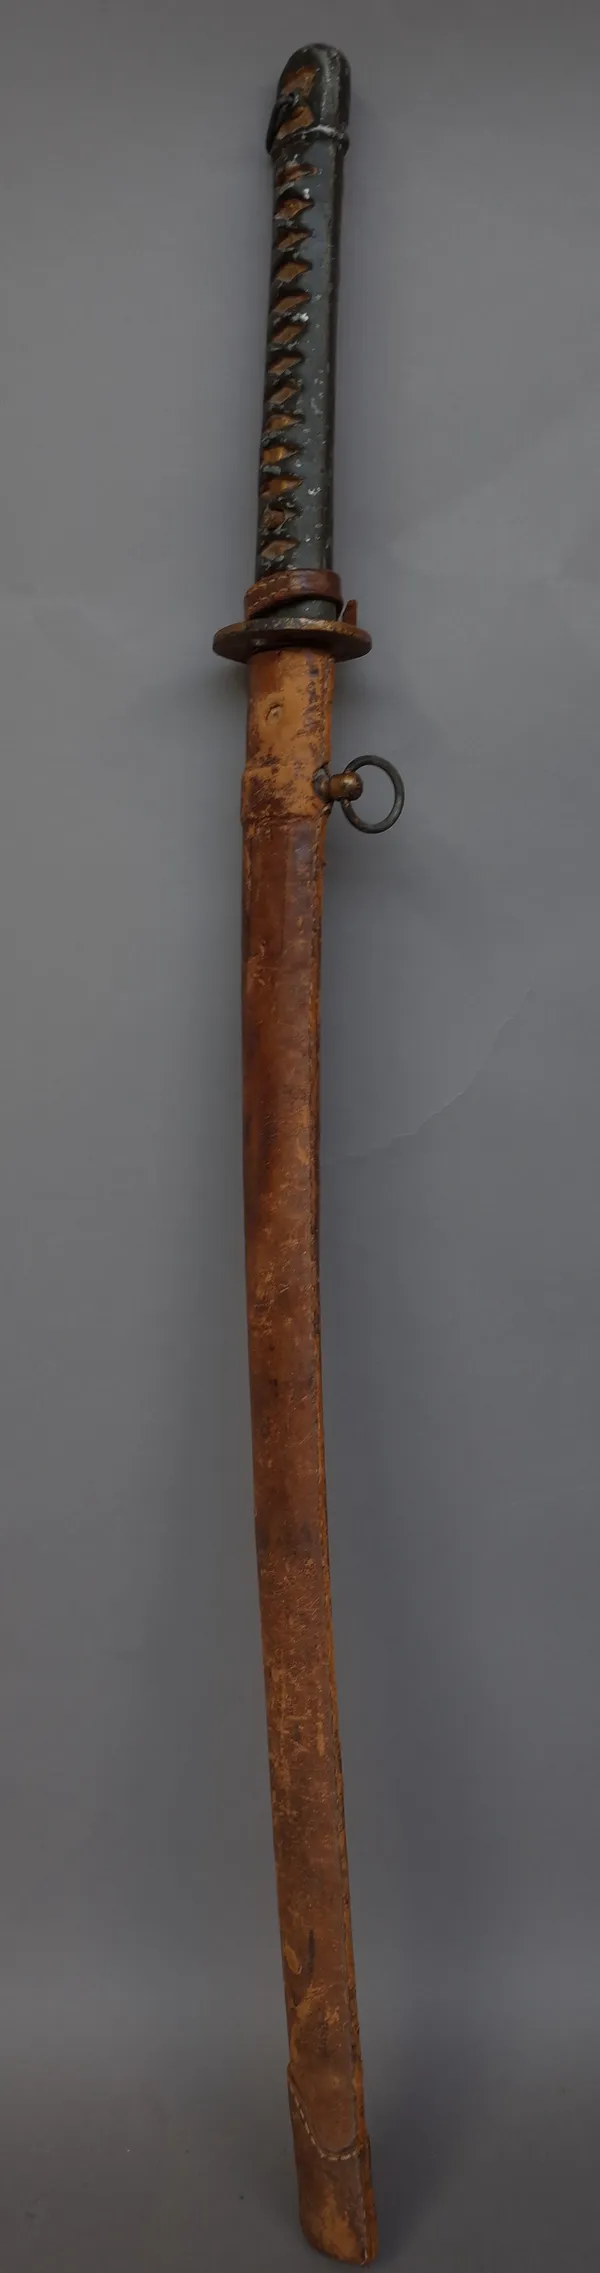 A Japanese Katana with polished steel blade, 62.5cm, iron tsuba and painted metal handle in a leather bound wooden scabbard.